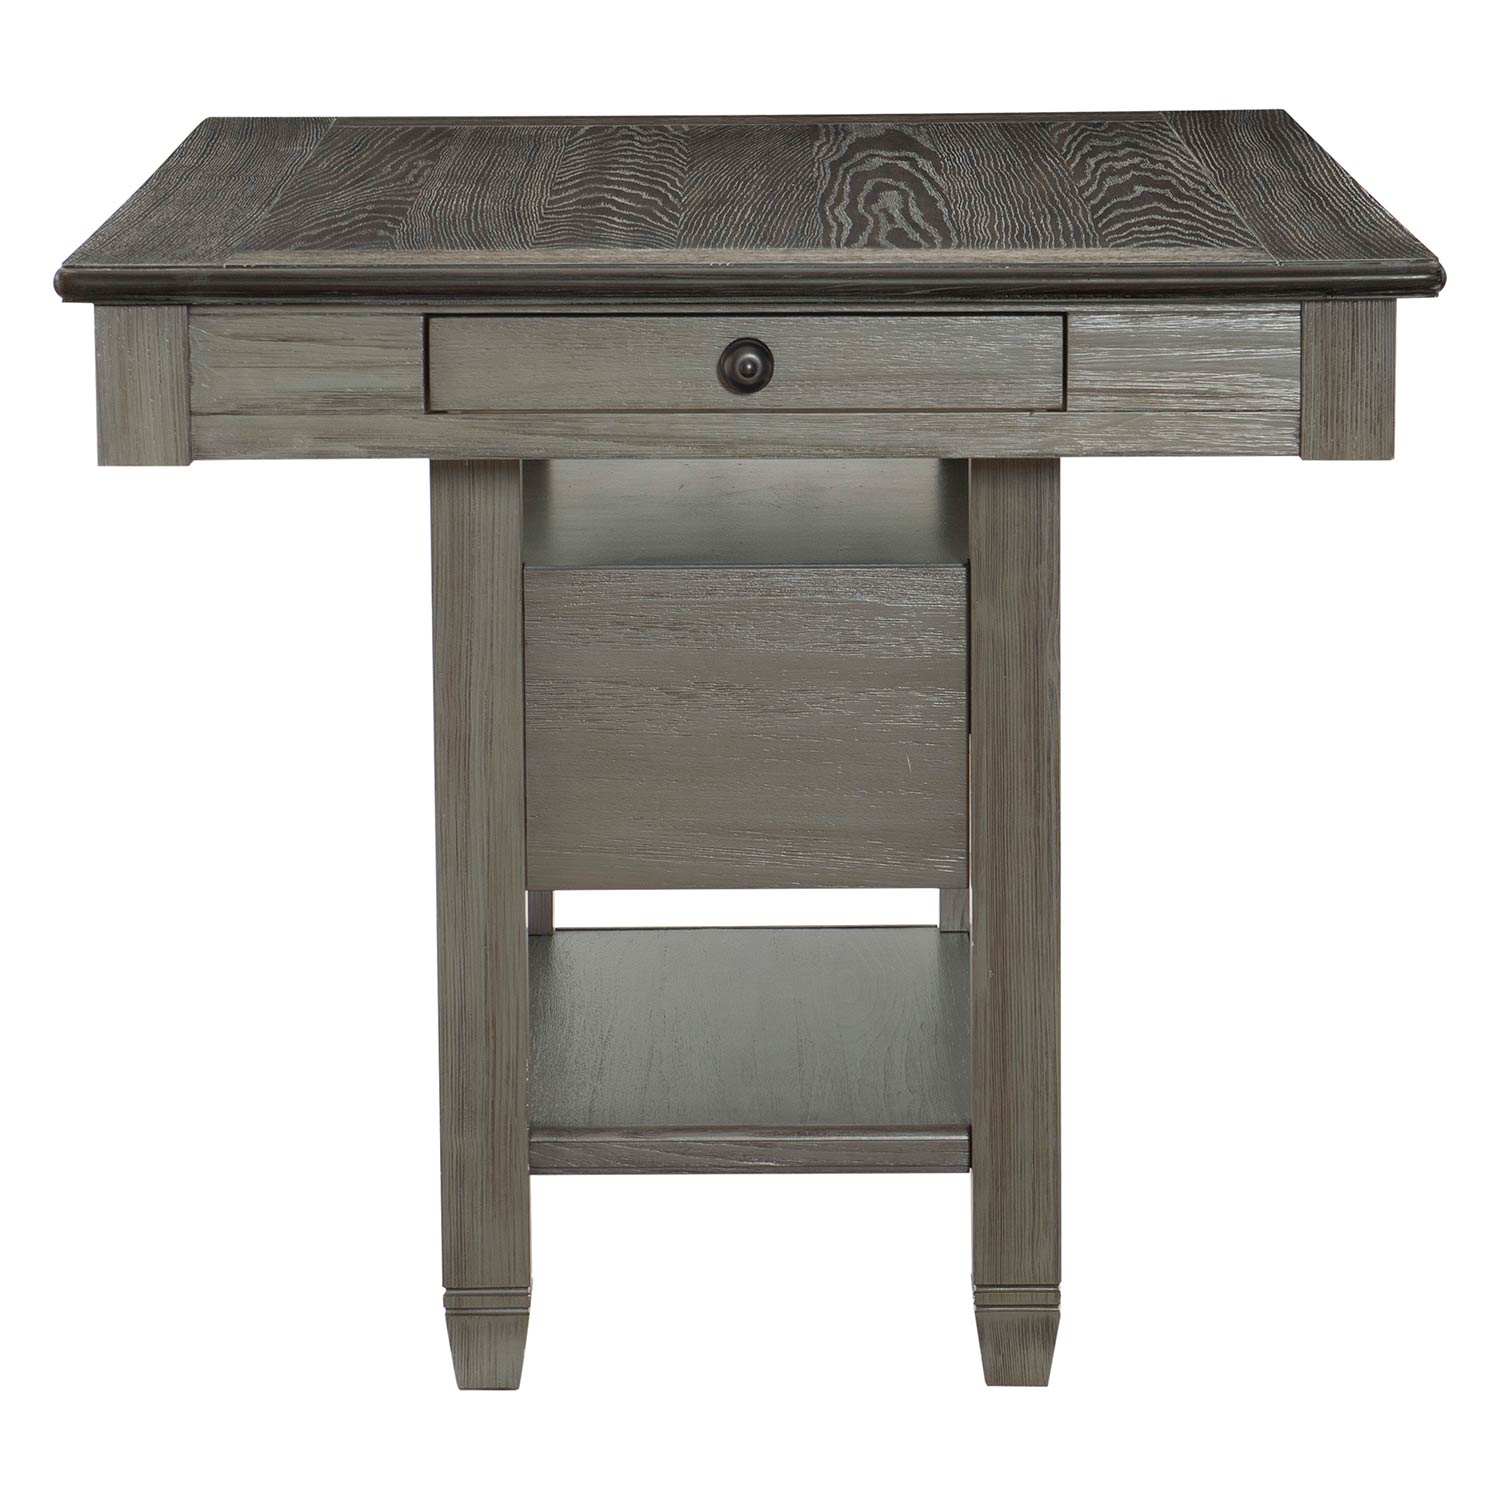 Homelegance Granby Counter Height DiningTable - Antique Gray and Coffee